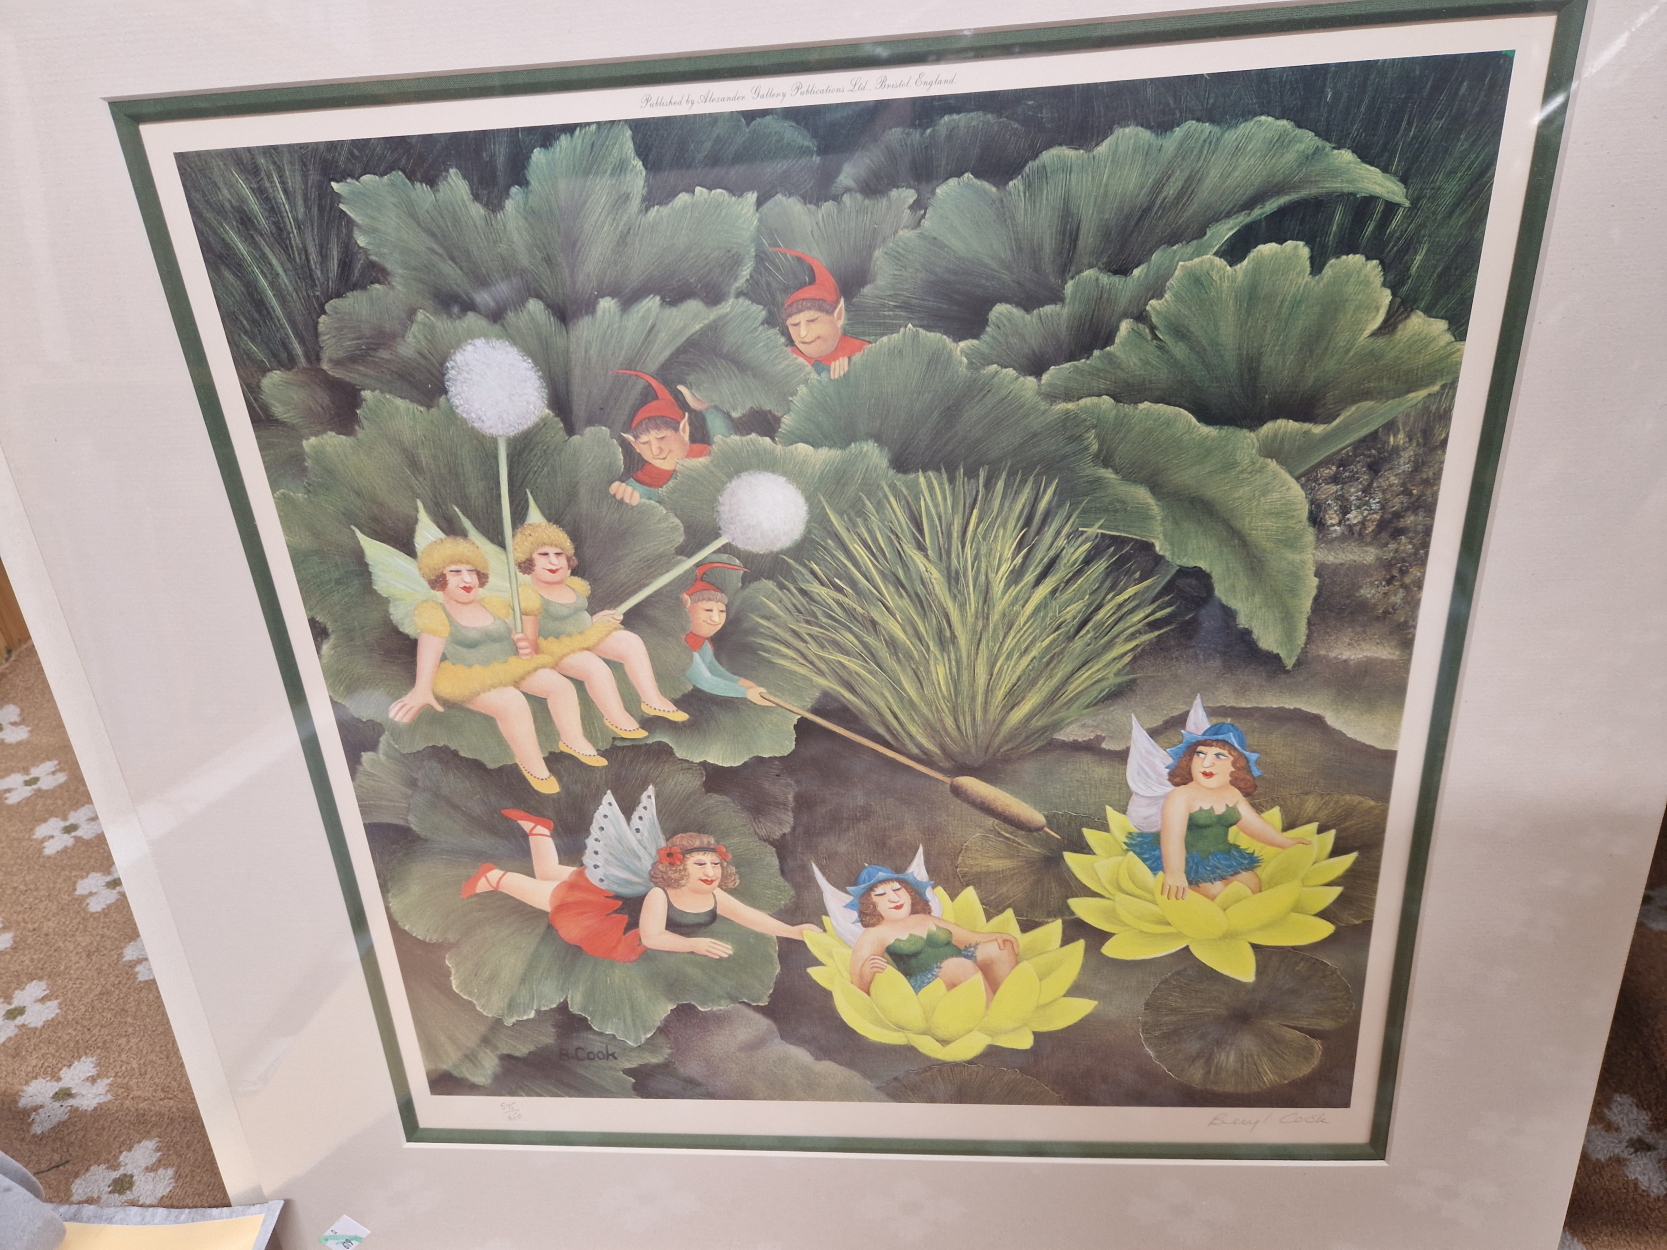 AFTER AND BY BERYL COOK, A PENCIL SIGNED PRINT OF THE FLOWER FAIRIES, 575/650, MOUNTED BUT NOT